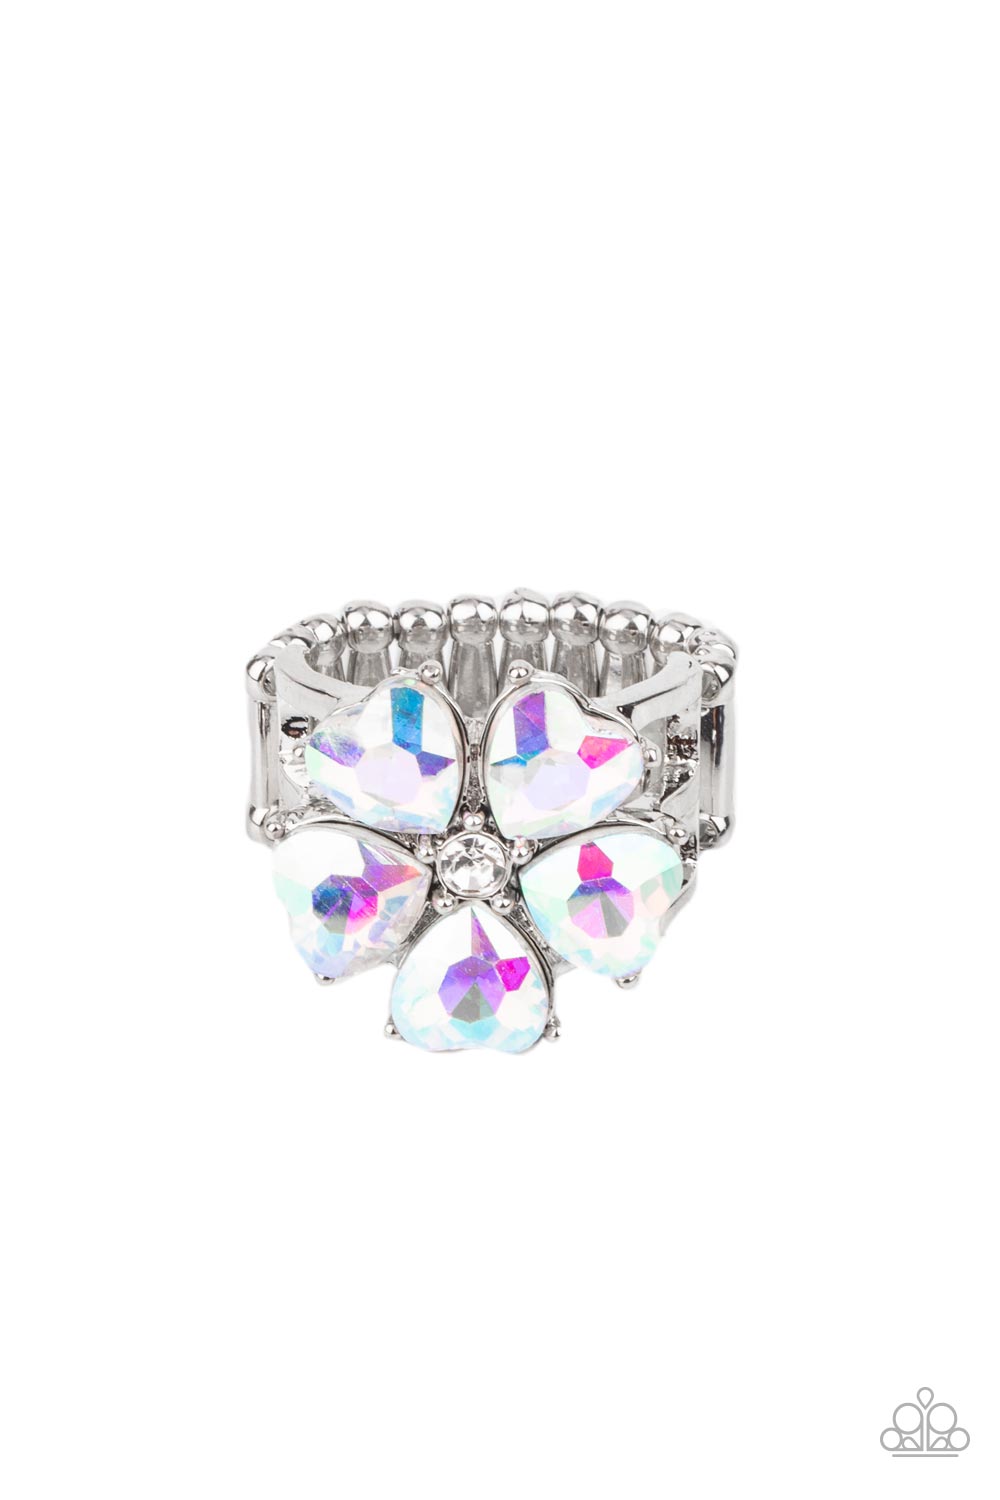 Minnesota Magic Multi Heart Ring - Paparazzi Accessories  Glittery heart shaped iridescent rhinestones bloom from a dainty white rhinestone center, creating a sparkly floral centerpiece atop layered silver bands. Features a stretchy band for a flexible fit.  Sold as one individual ring.